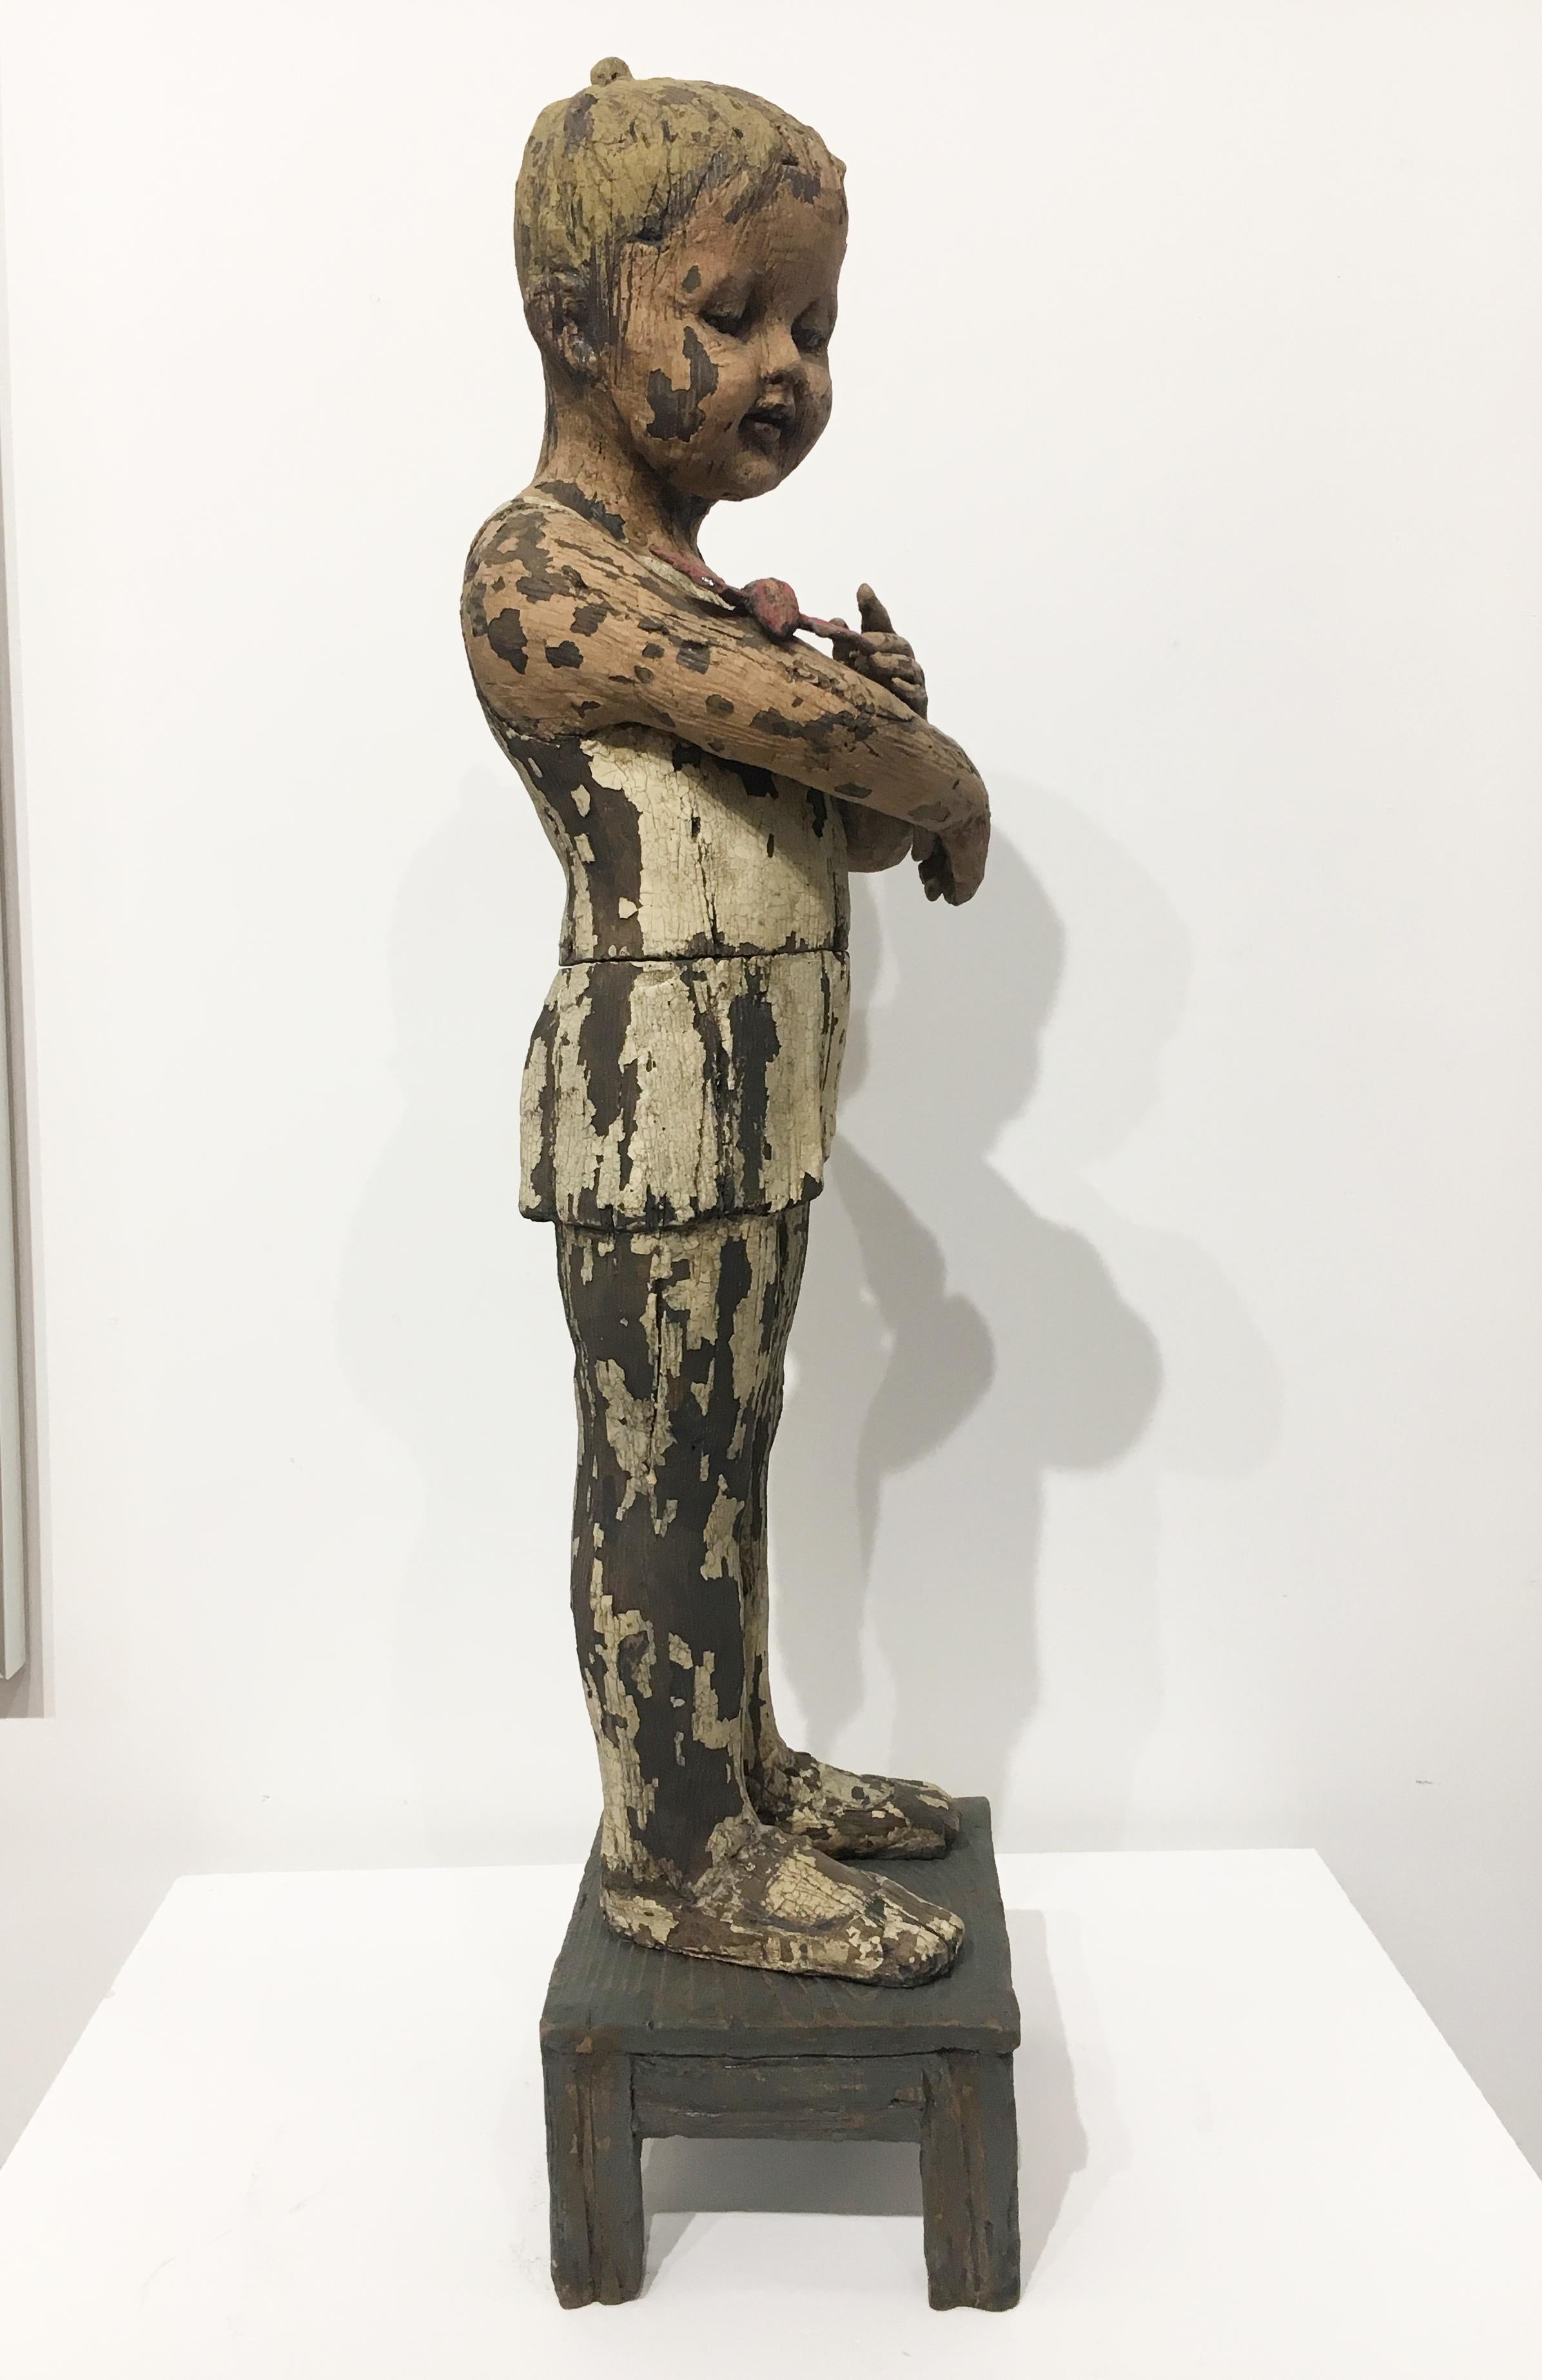 Margaret Keelan’s figurative sculptures confront issues of mortality, decay, beauty, aging, and innocence. The faces are based on nineteenth century dolls, yet their contemporary styling and decayed surfaces disconnect them from time and place. What